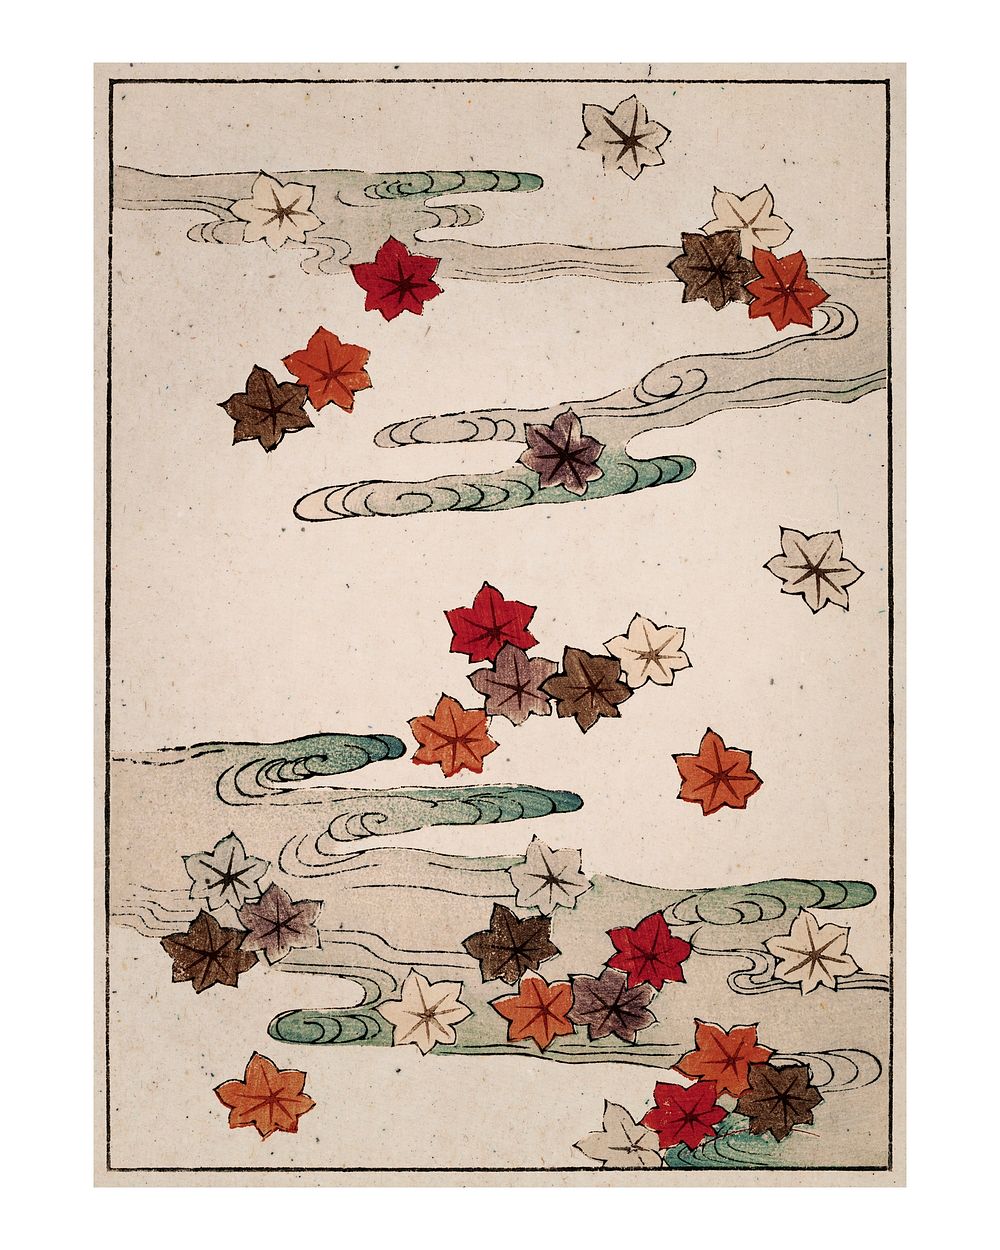 Autumn and water vintage wall art print and poster design remix from original painting by Watanabe Seitei.